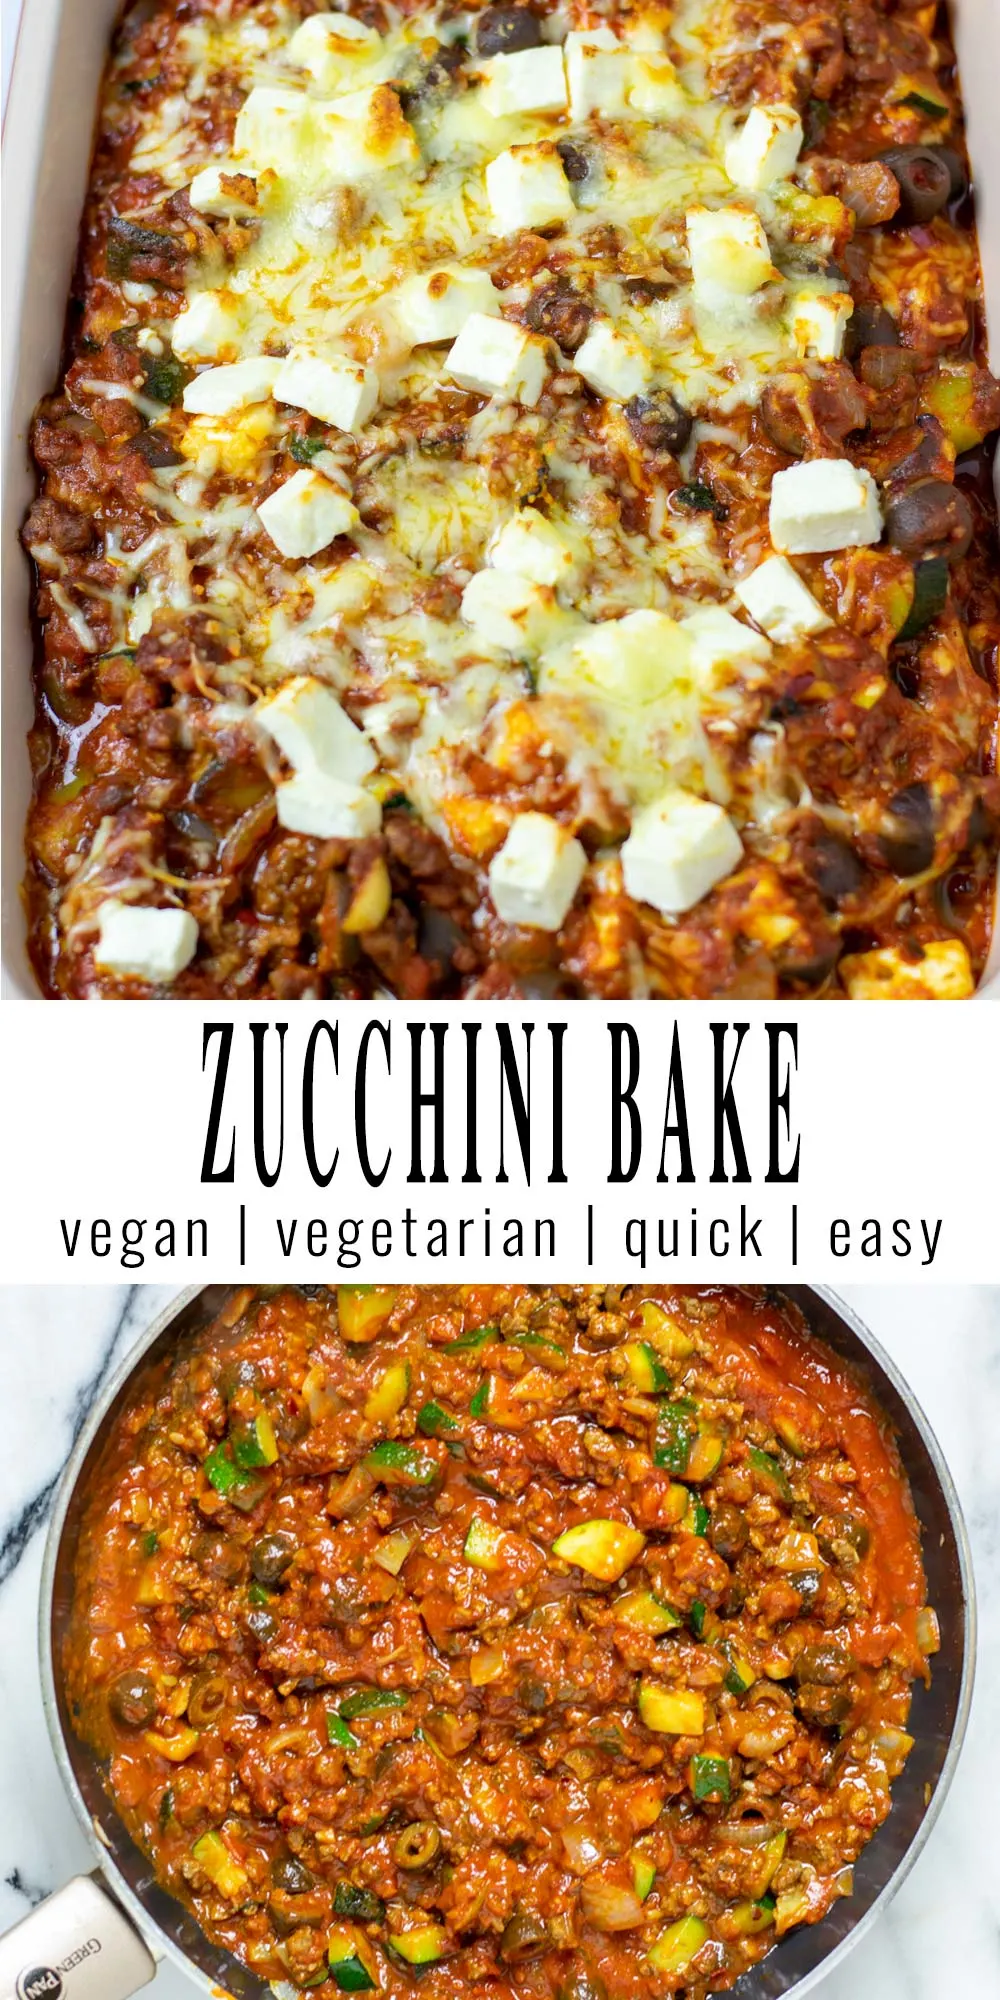 Collage of two pictures of the Zucchini Bake with recipe title text.